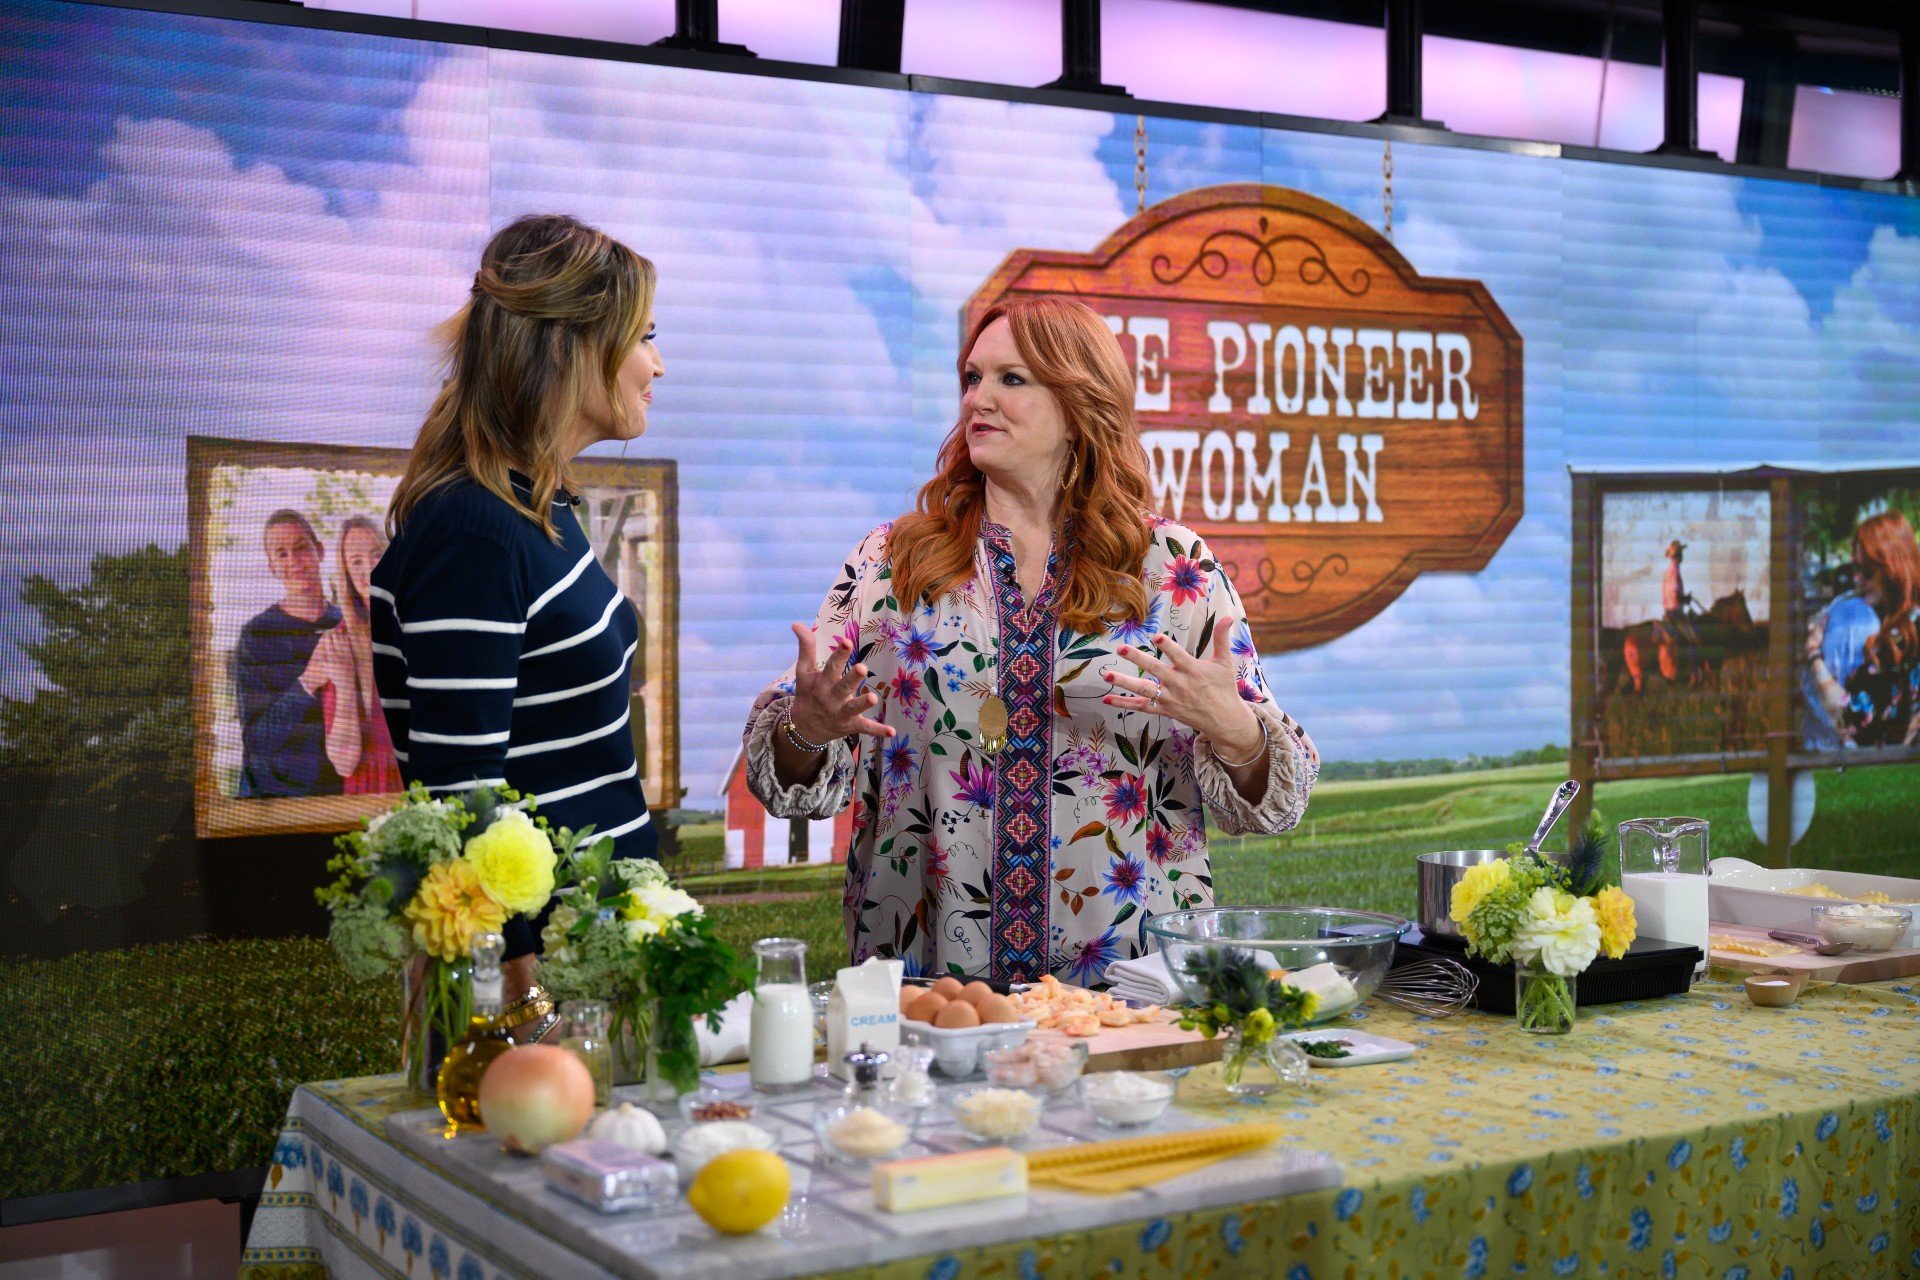 Savannah Guthrie and Ree Drummond talk during a Pioneer Woman cooking segment on the Today show.